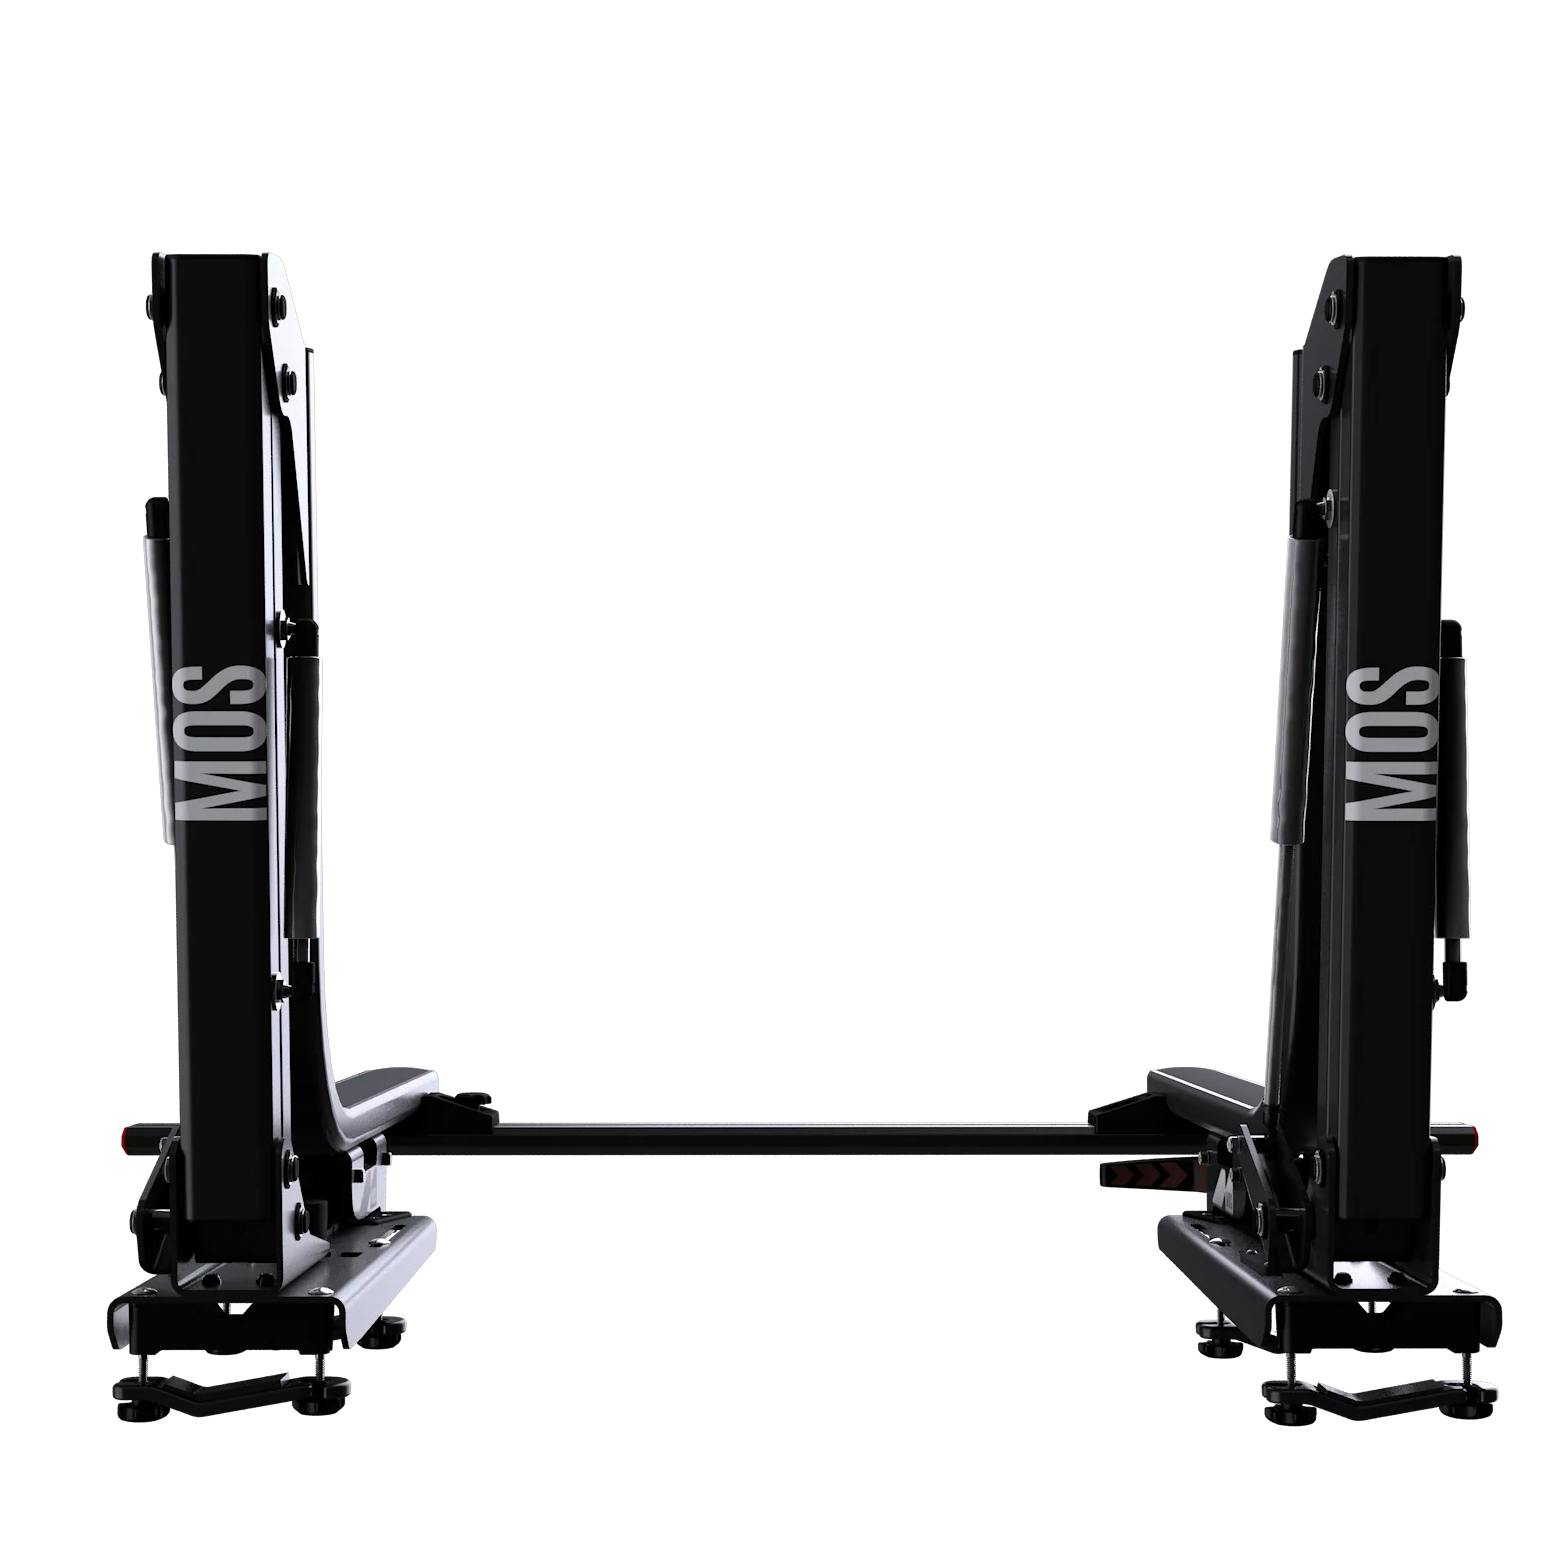 MOS UpLift Load Assist Rear View Hardware